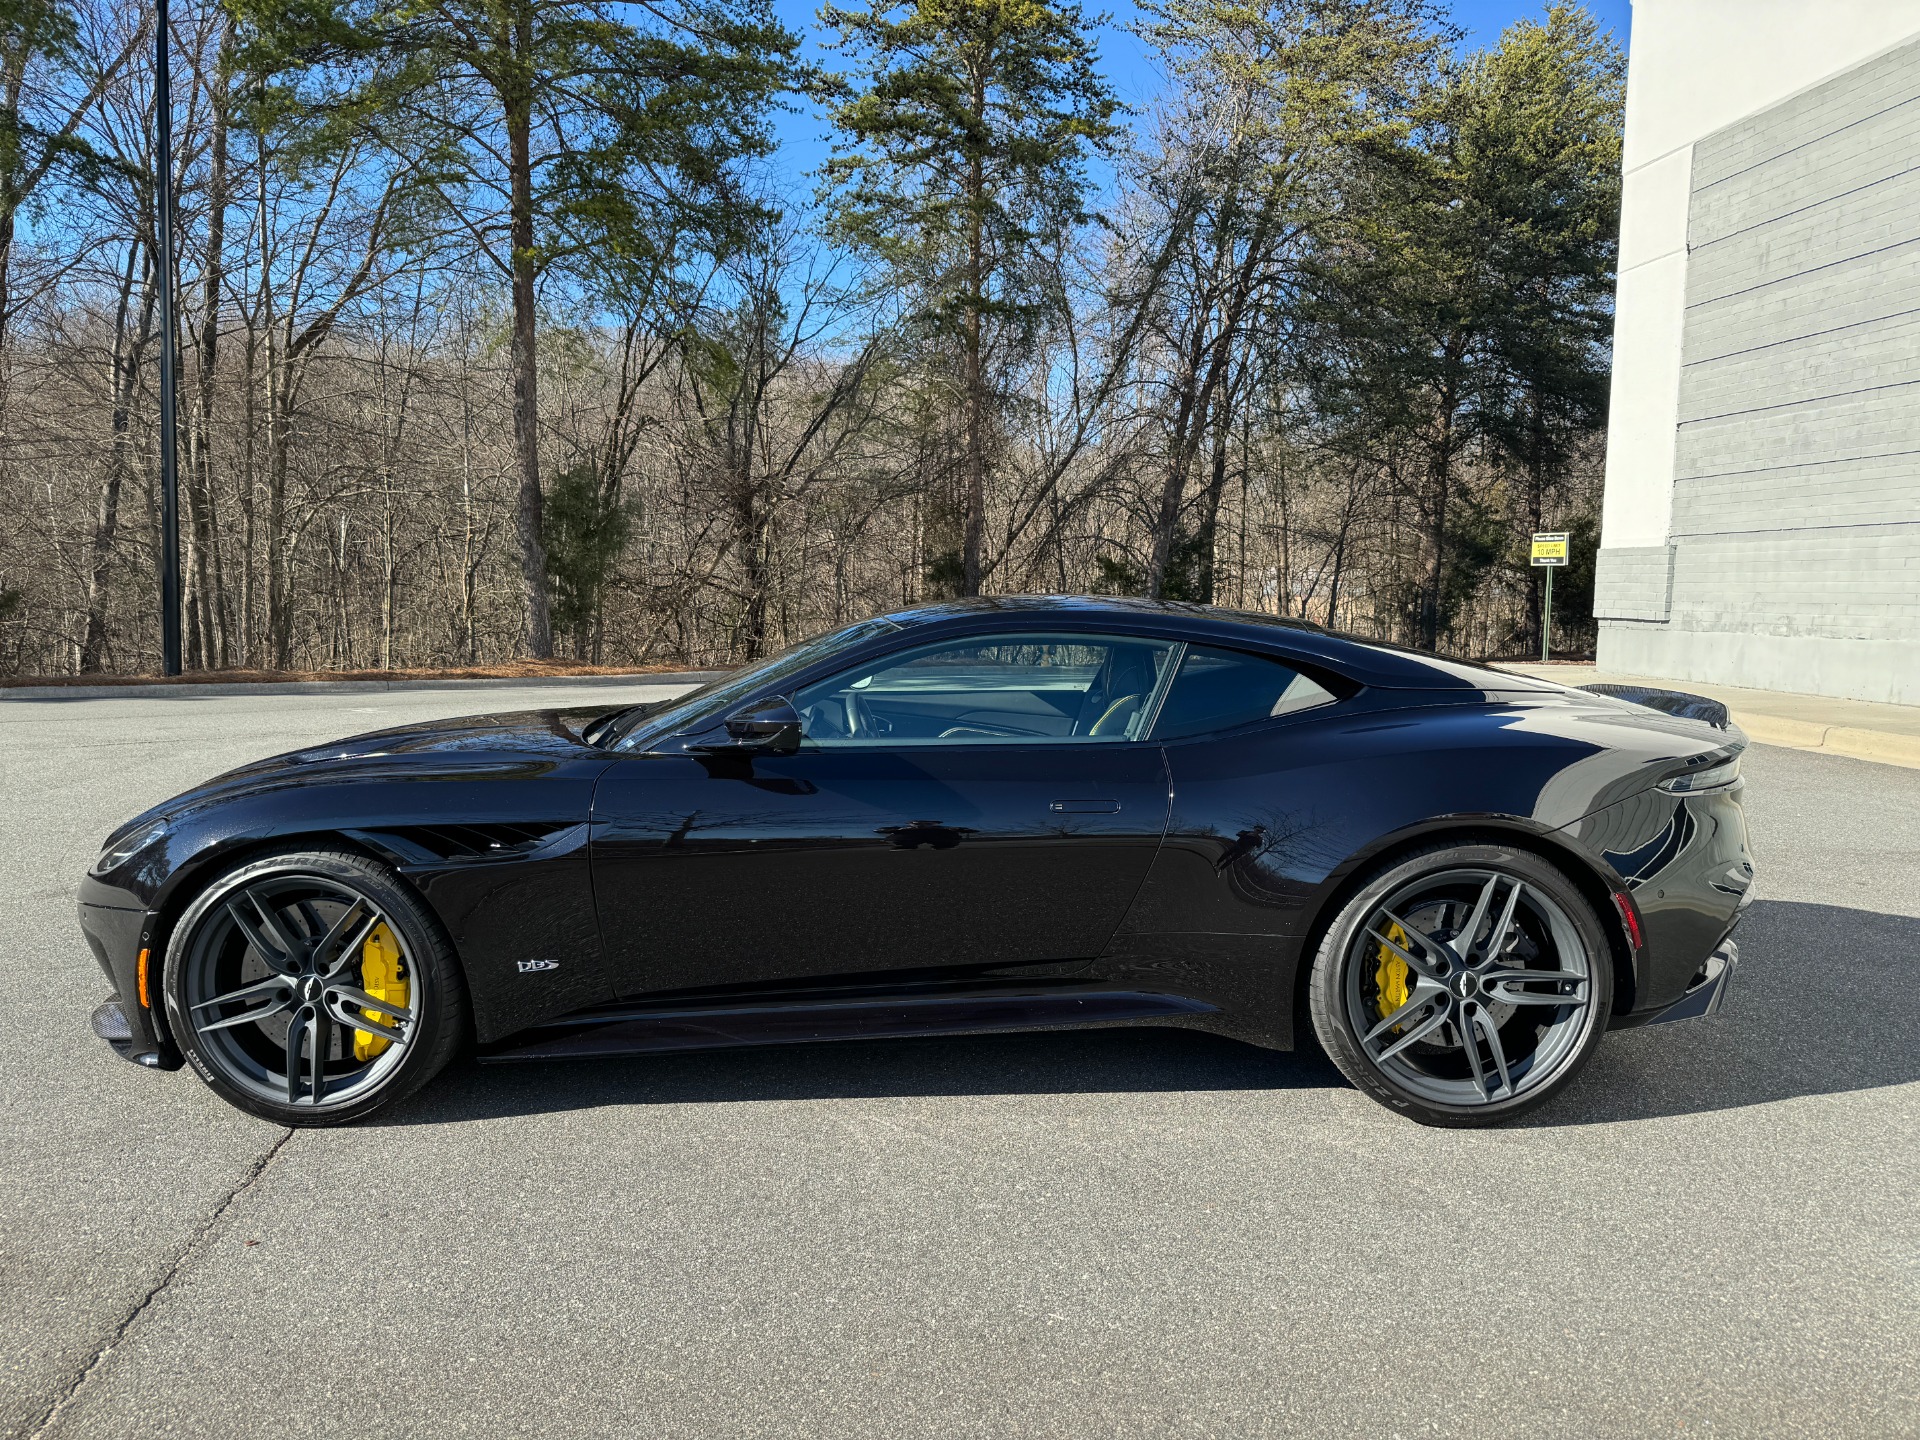 Used 2020 Aston Martin DBS SUPERLEGGERA / CARBON FIBER / V12 750HP / ACCENT STITCHING for sale $240,000 at Formula Imports in Charlotte NC 28227 5